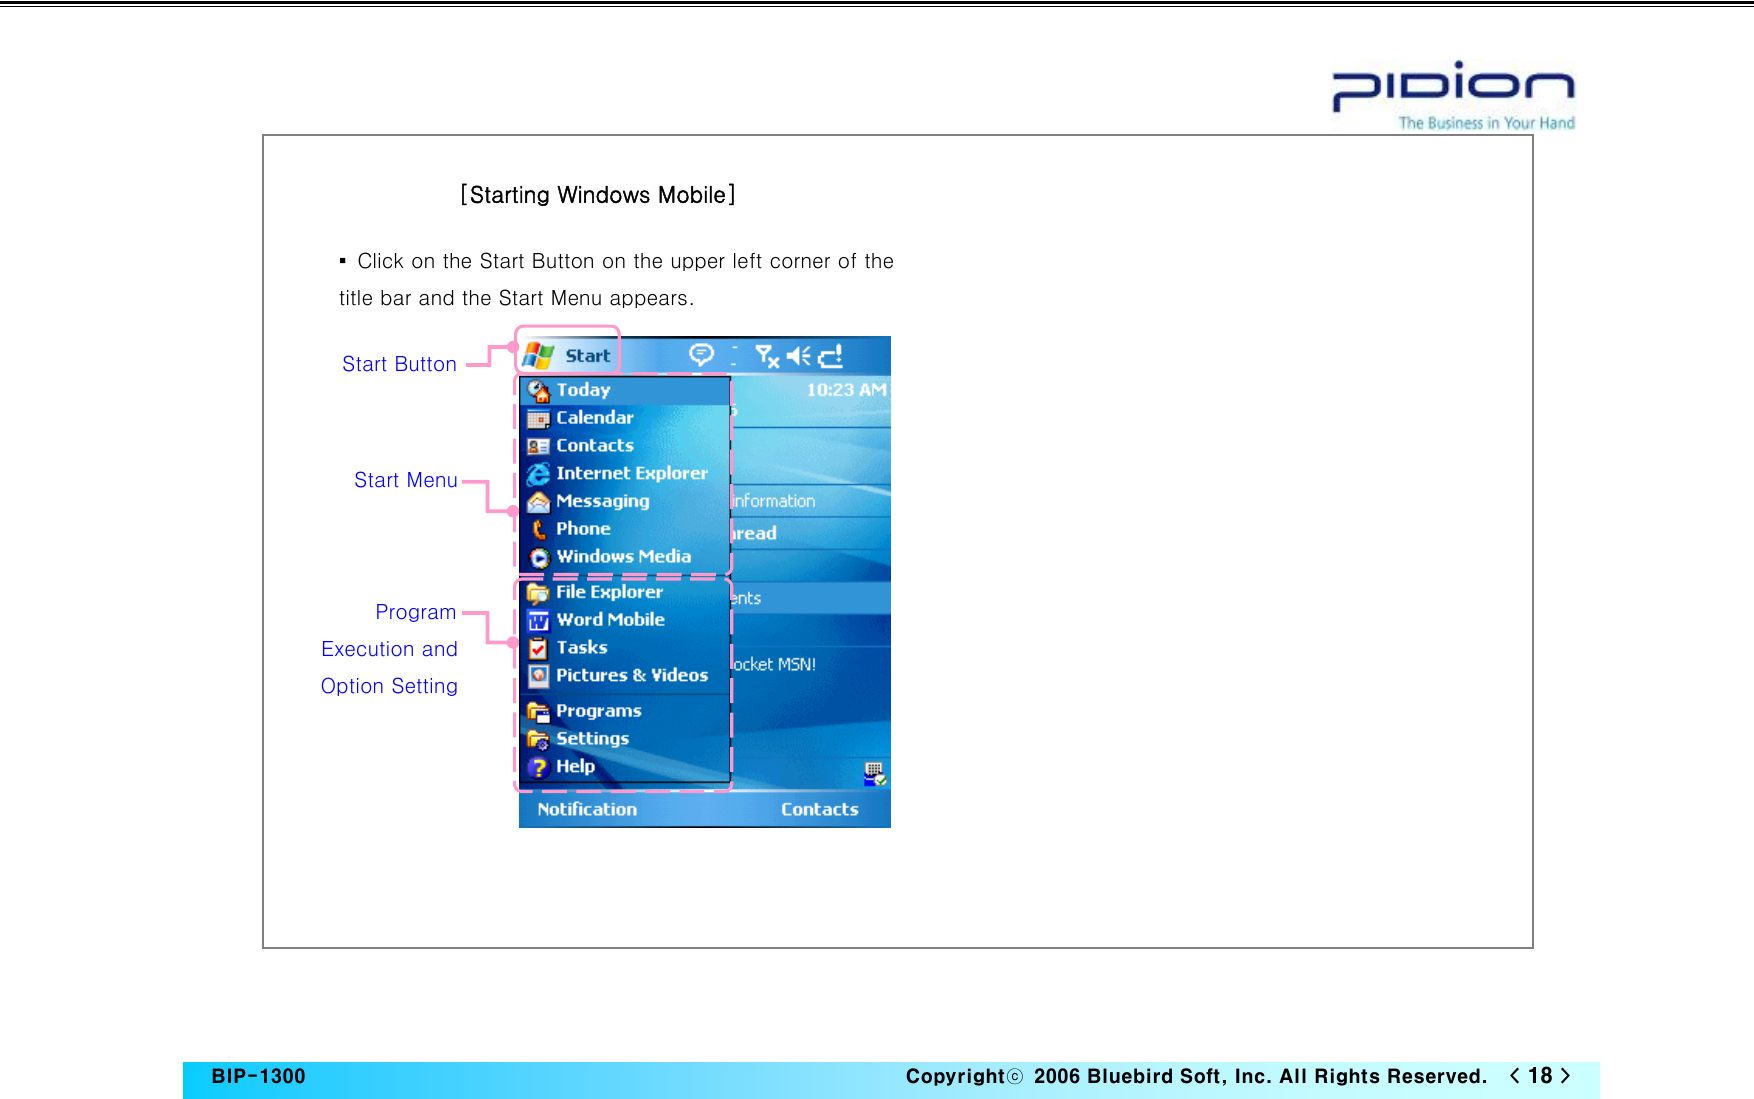   BIP-1300                                                                   Copyrightⓒ  2006 Bluebird Soft, Inc. All Rights Reserved.   &lt; 18 &gt;                           [Starting Windows Mobile]▪  Click on the Start Button on the upper left corner of the title bar and the Start Menu appears.   Start Button Start Menu Program Execution and Option Setting  